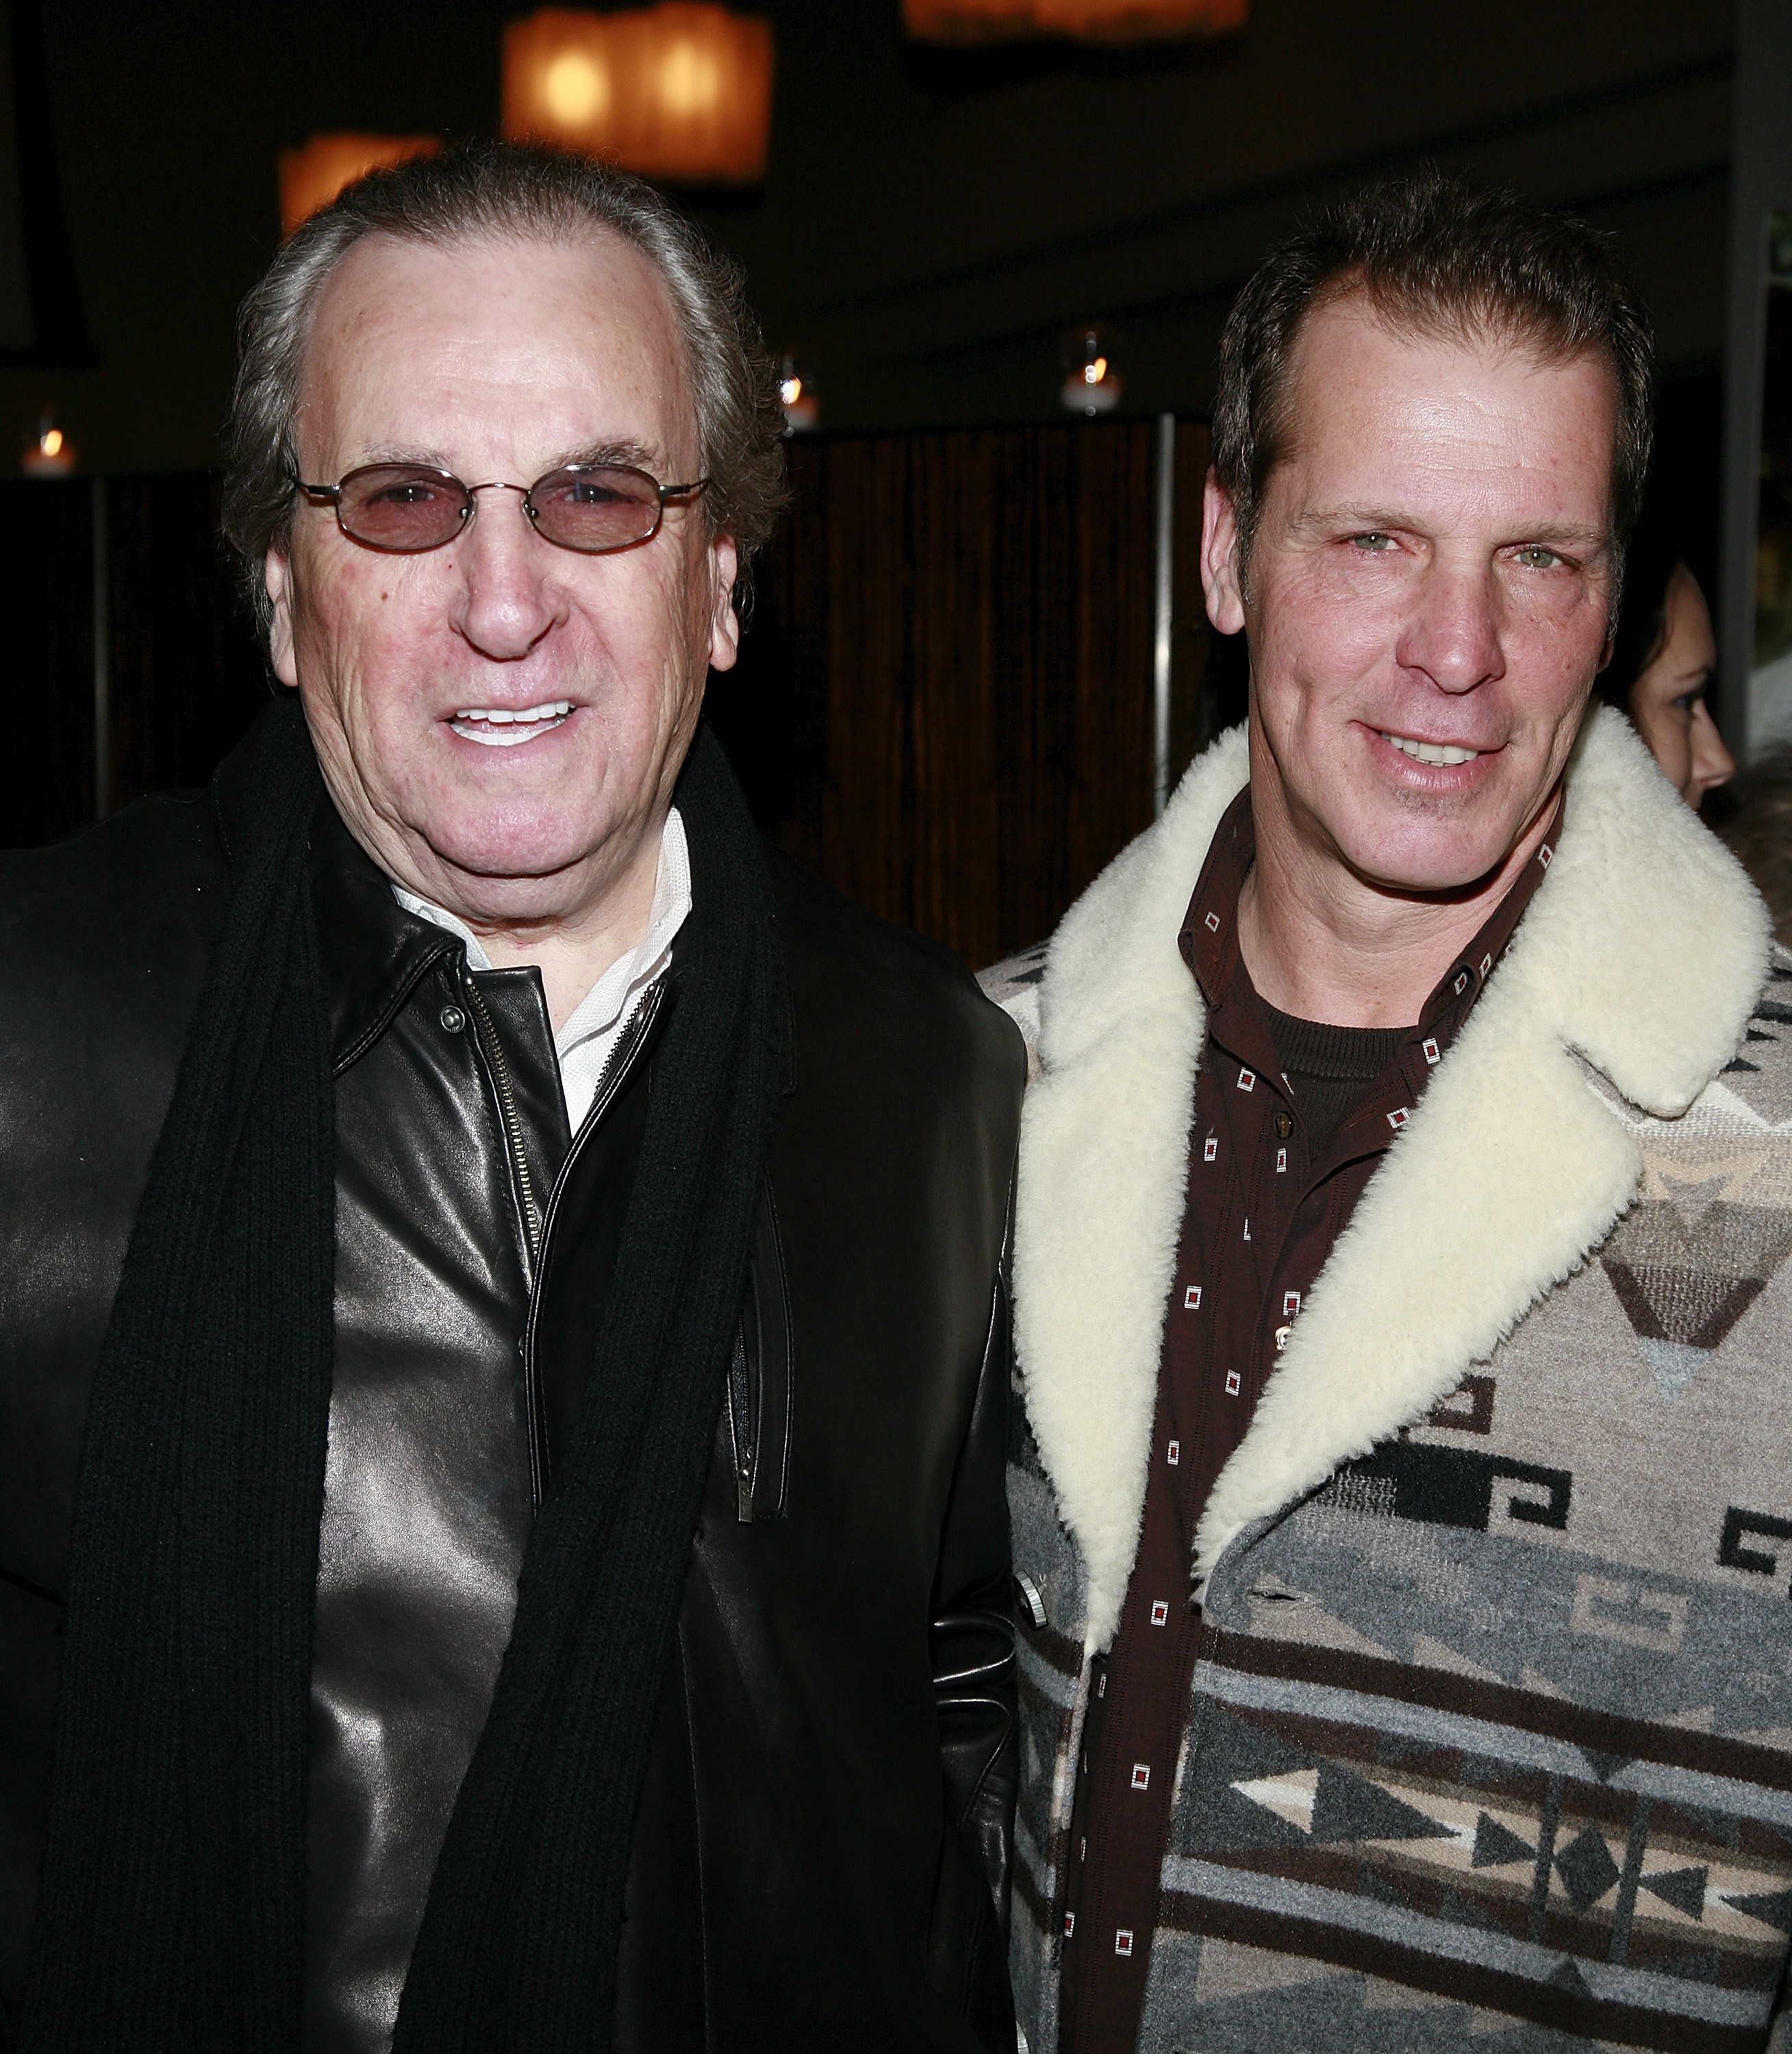 NEW YORK - FEBRUARY 11:  L to R Actors Danny Aiello and son Rick Aiello attend "Comedy At The Edge" book party at Time Warner Center on February 11, 2008 in New York City.  (Photo by Charles Eshelman/FilmMagic) (Foto: FilmMagic)